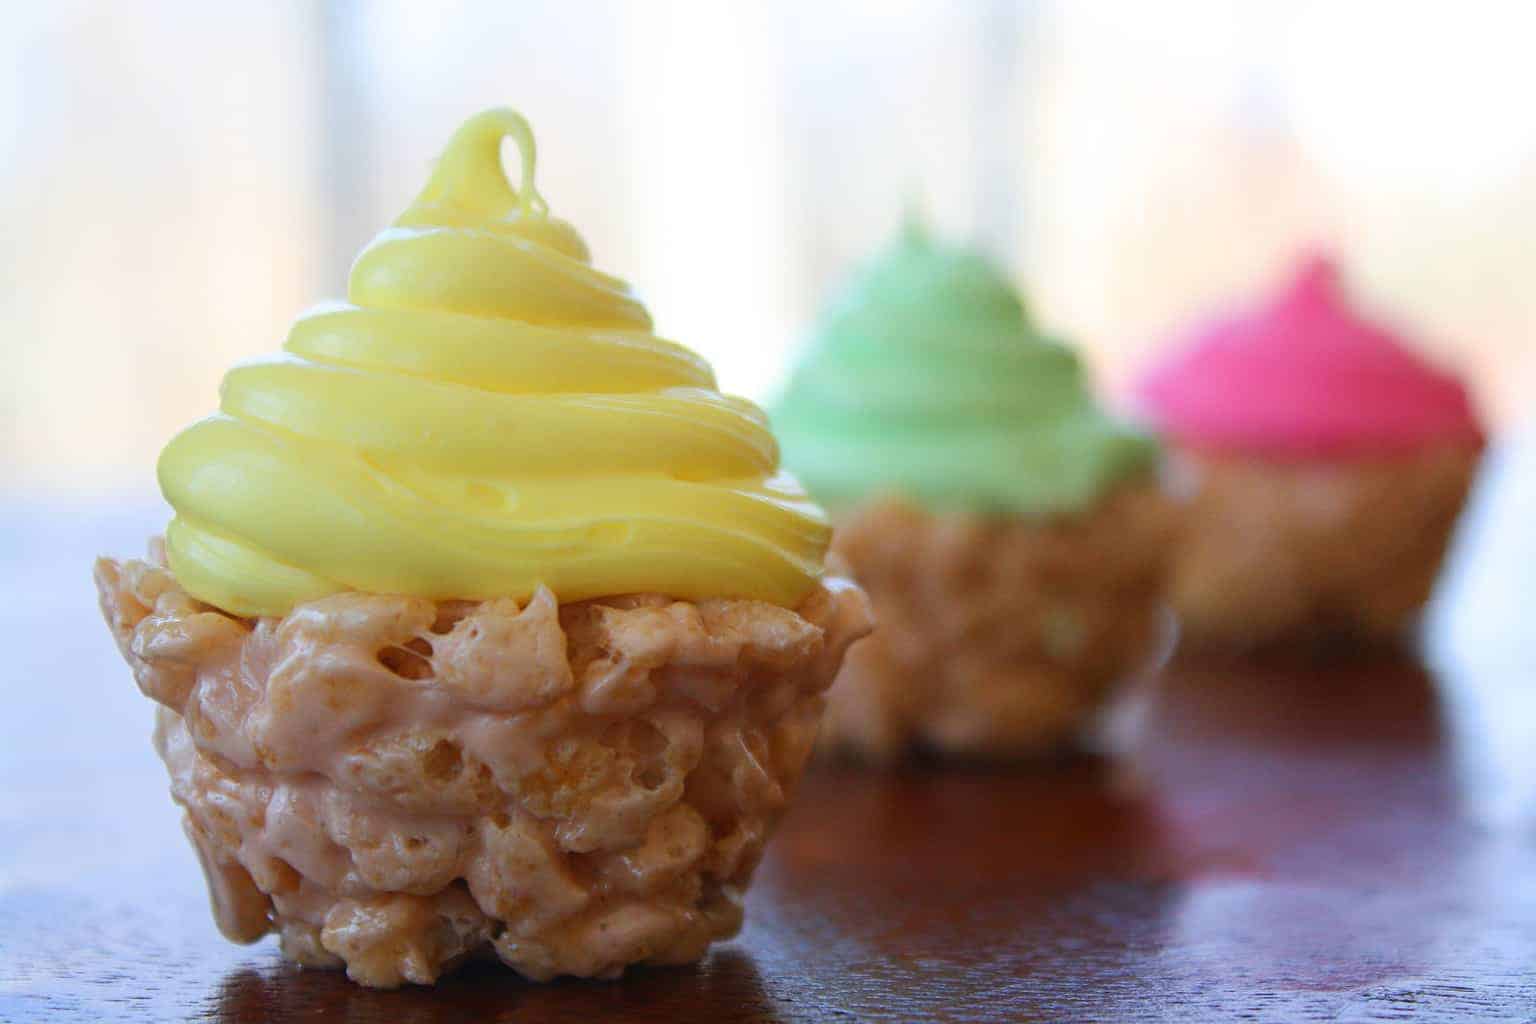 rice krispies cupcakes trio with yellow, green and pink frostings on a brown table next to a window